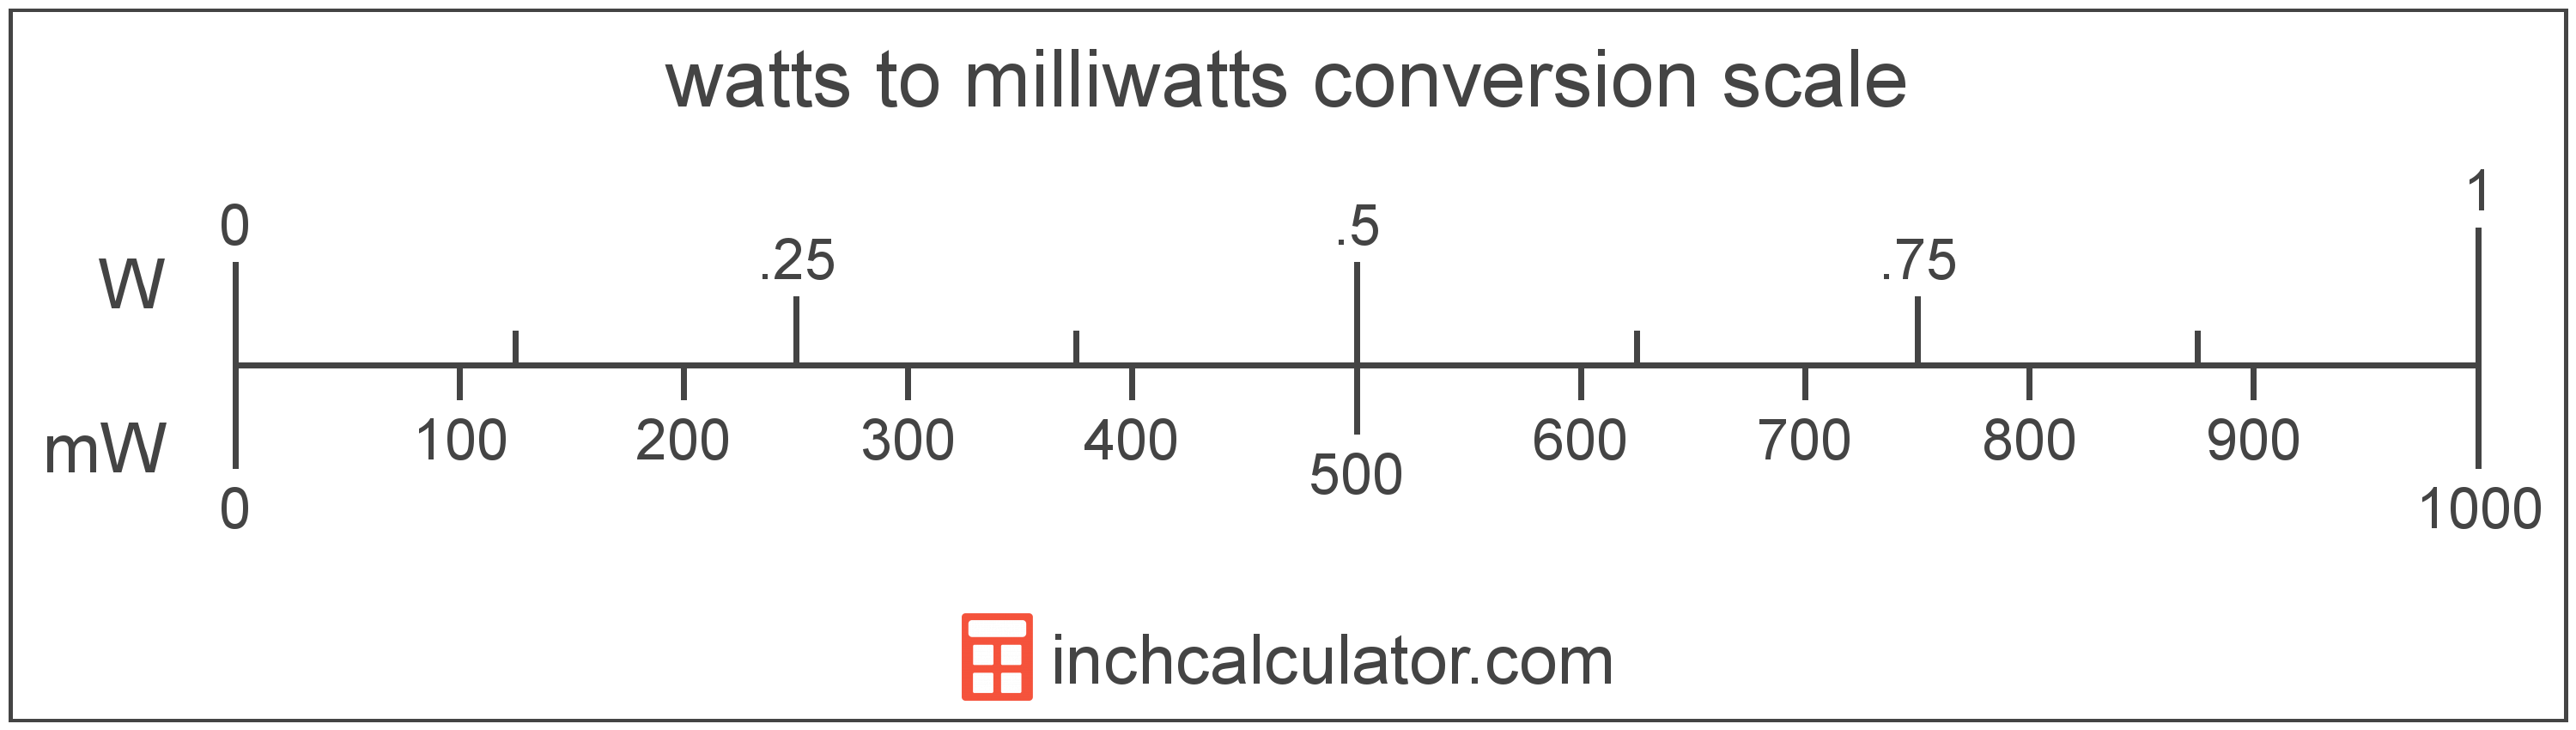 conversion scale showing milliwatts and equivalent watts power values